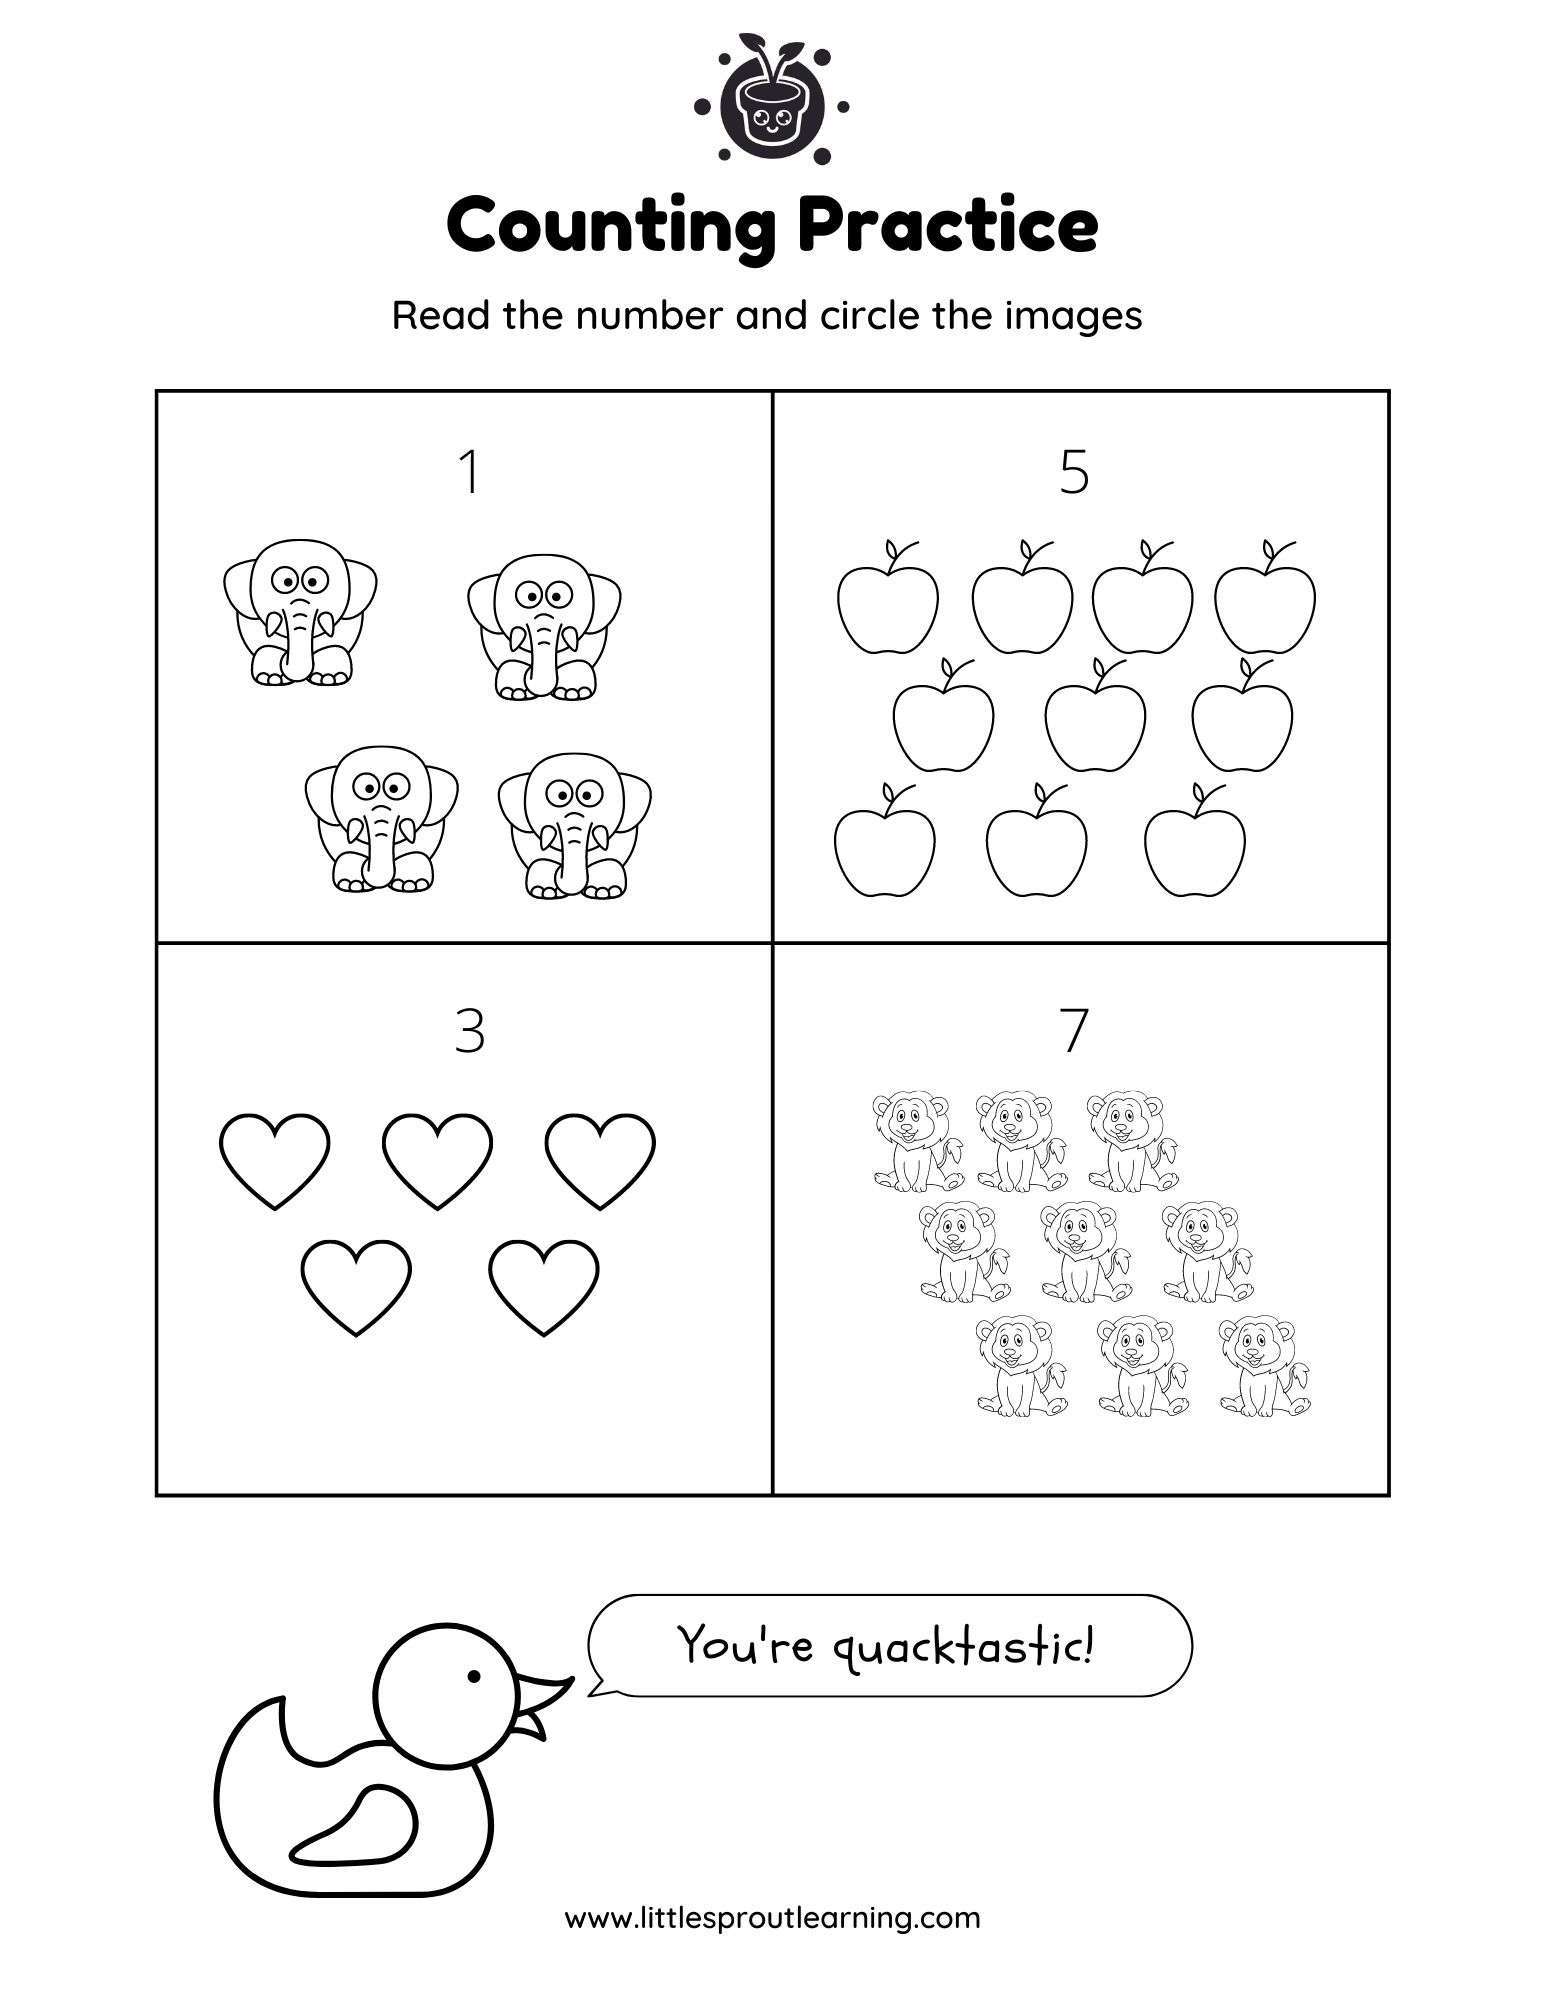 Counting Practice Worksheet Kindergarten 1-10 Count the objects and circle